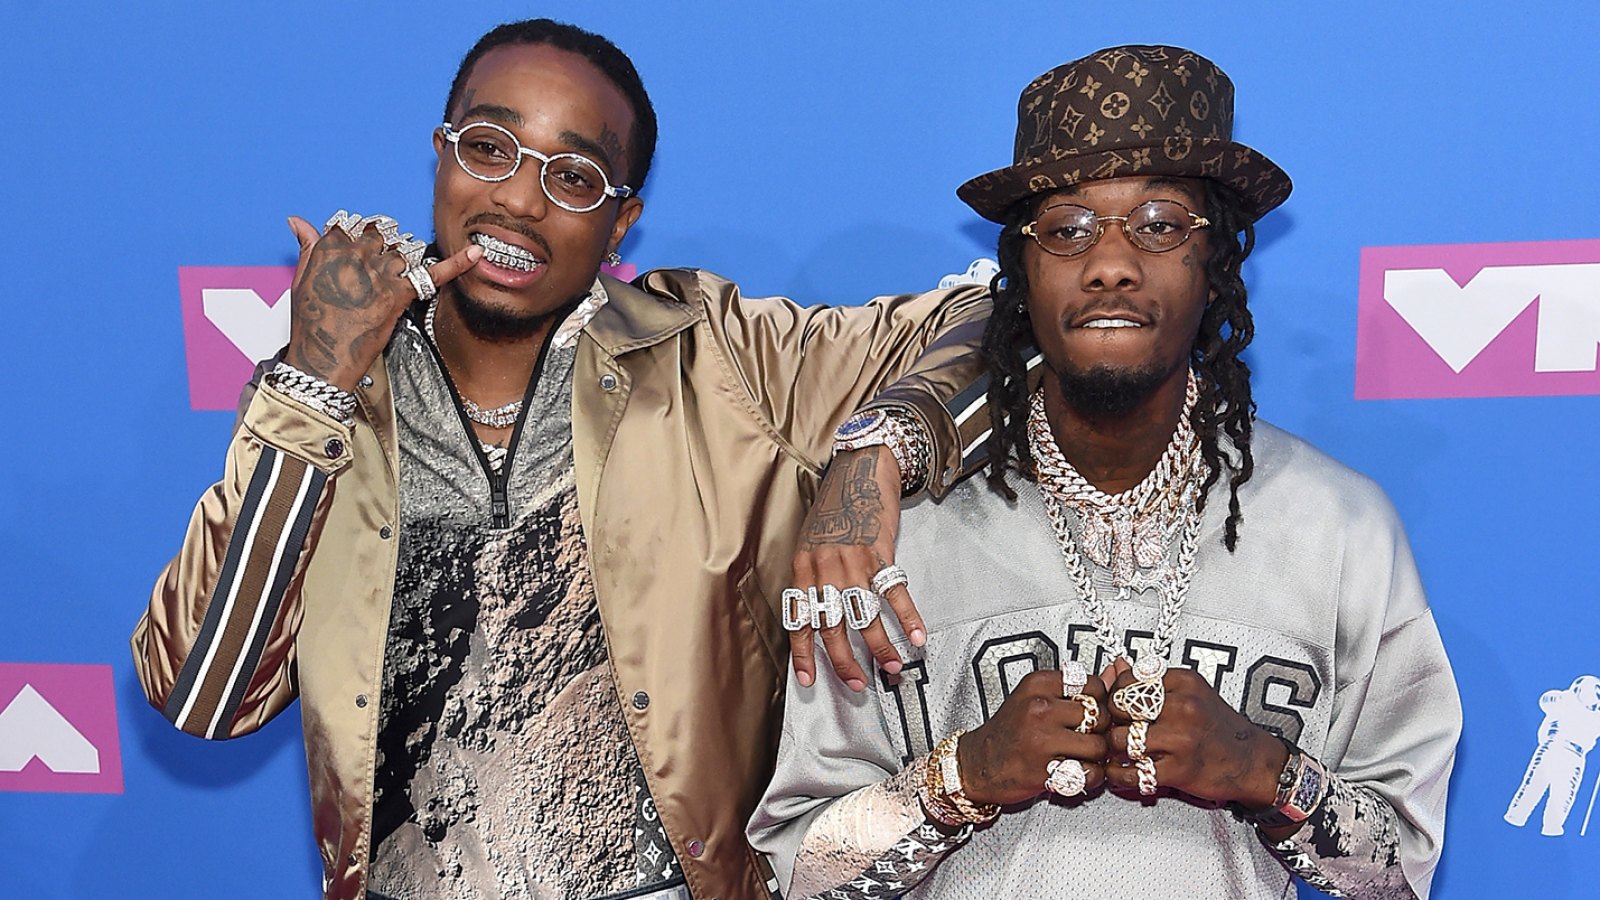 Offset Opens Up About His Bond With Quavo After Takeoff's Death: 'That’s My Brother'